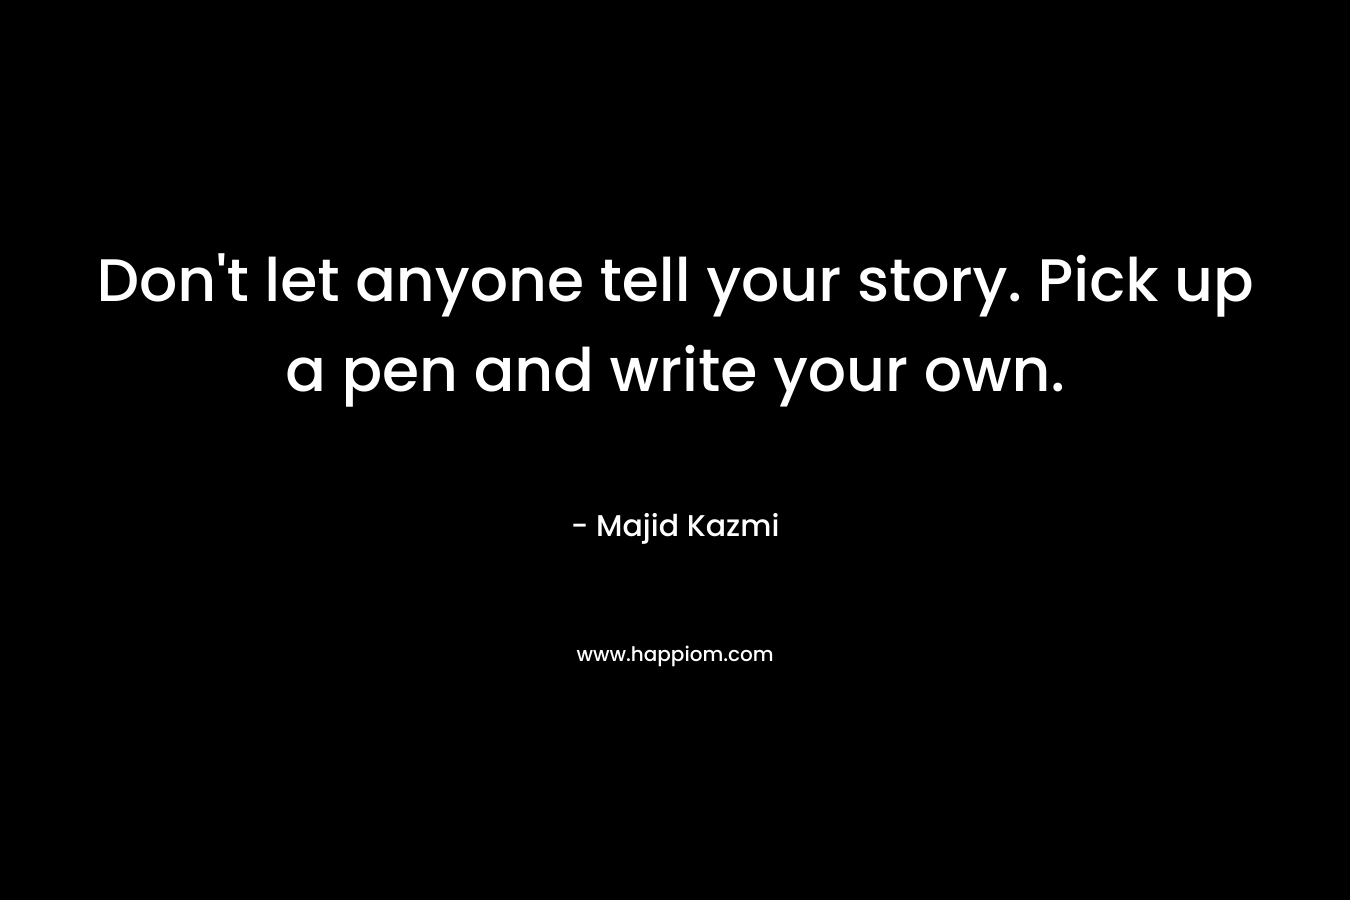 Don't let anyone tell your story. Pick up a pen and write your own.